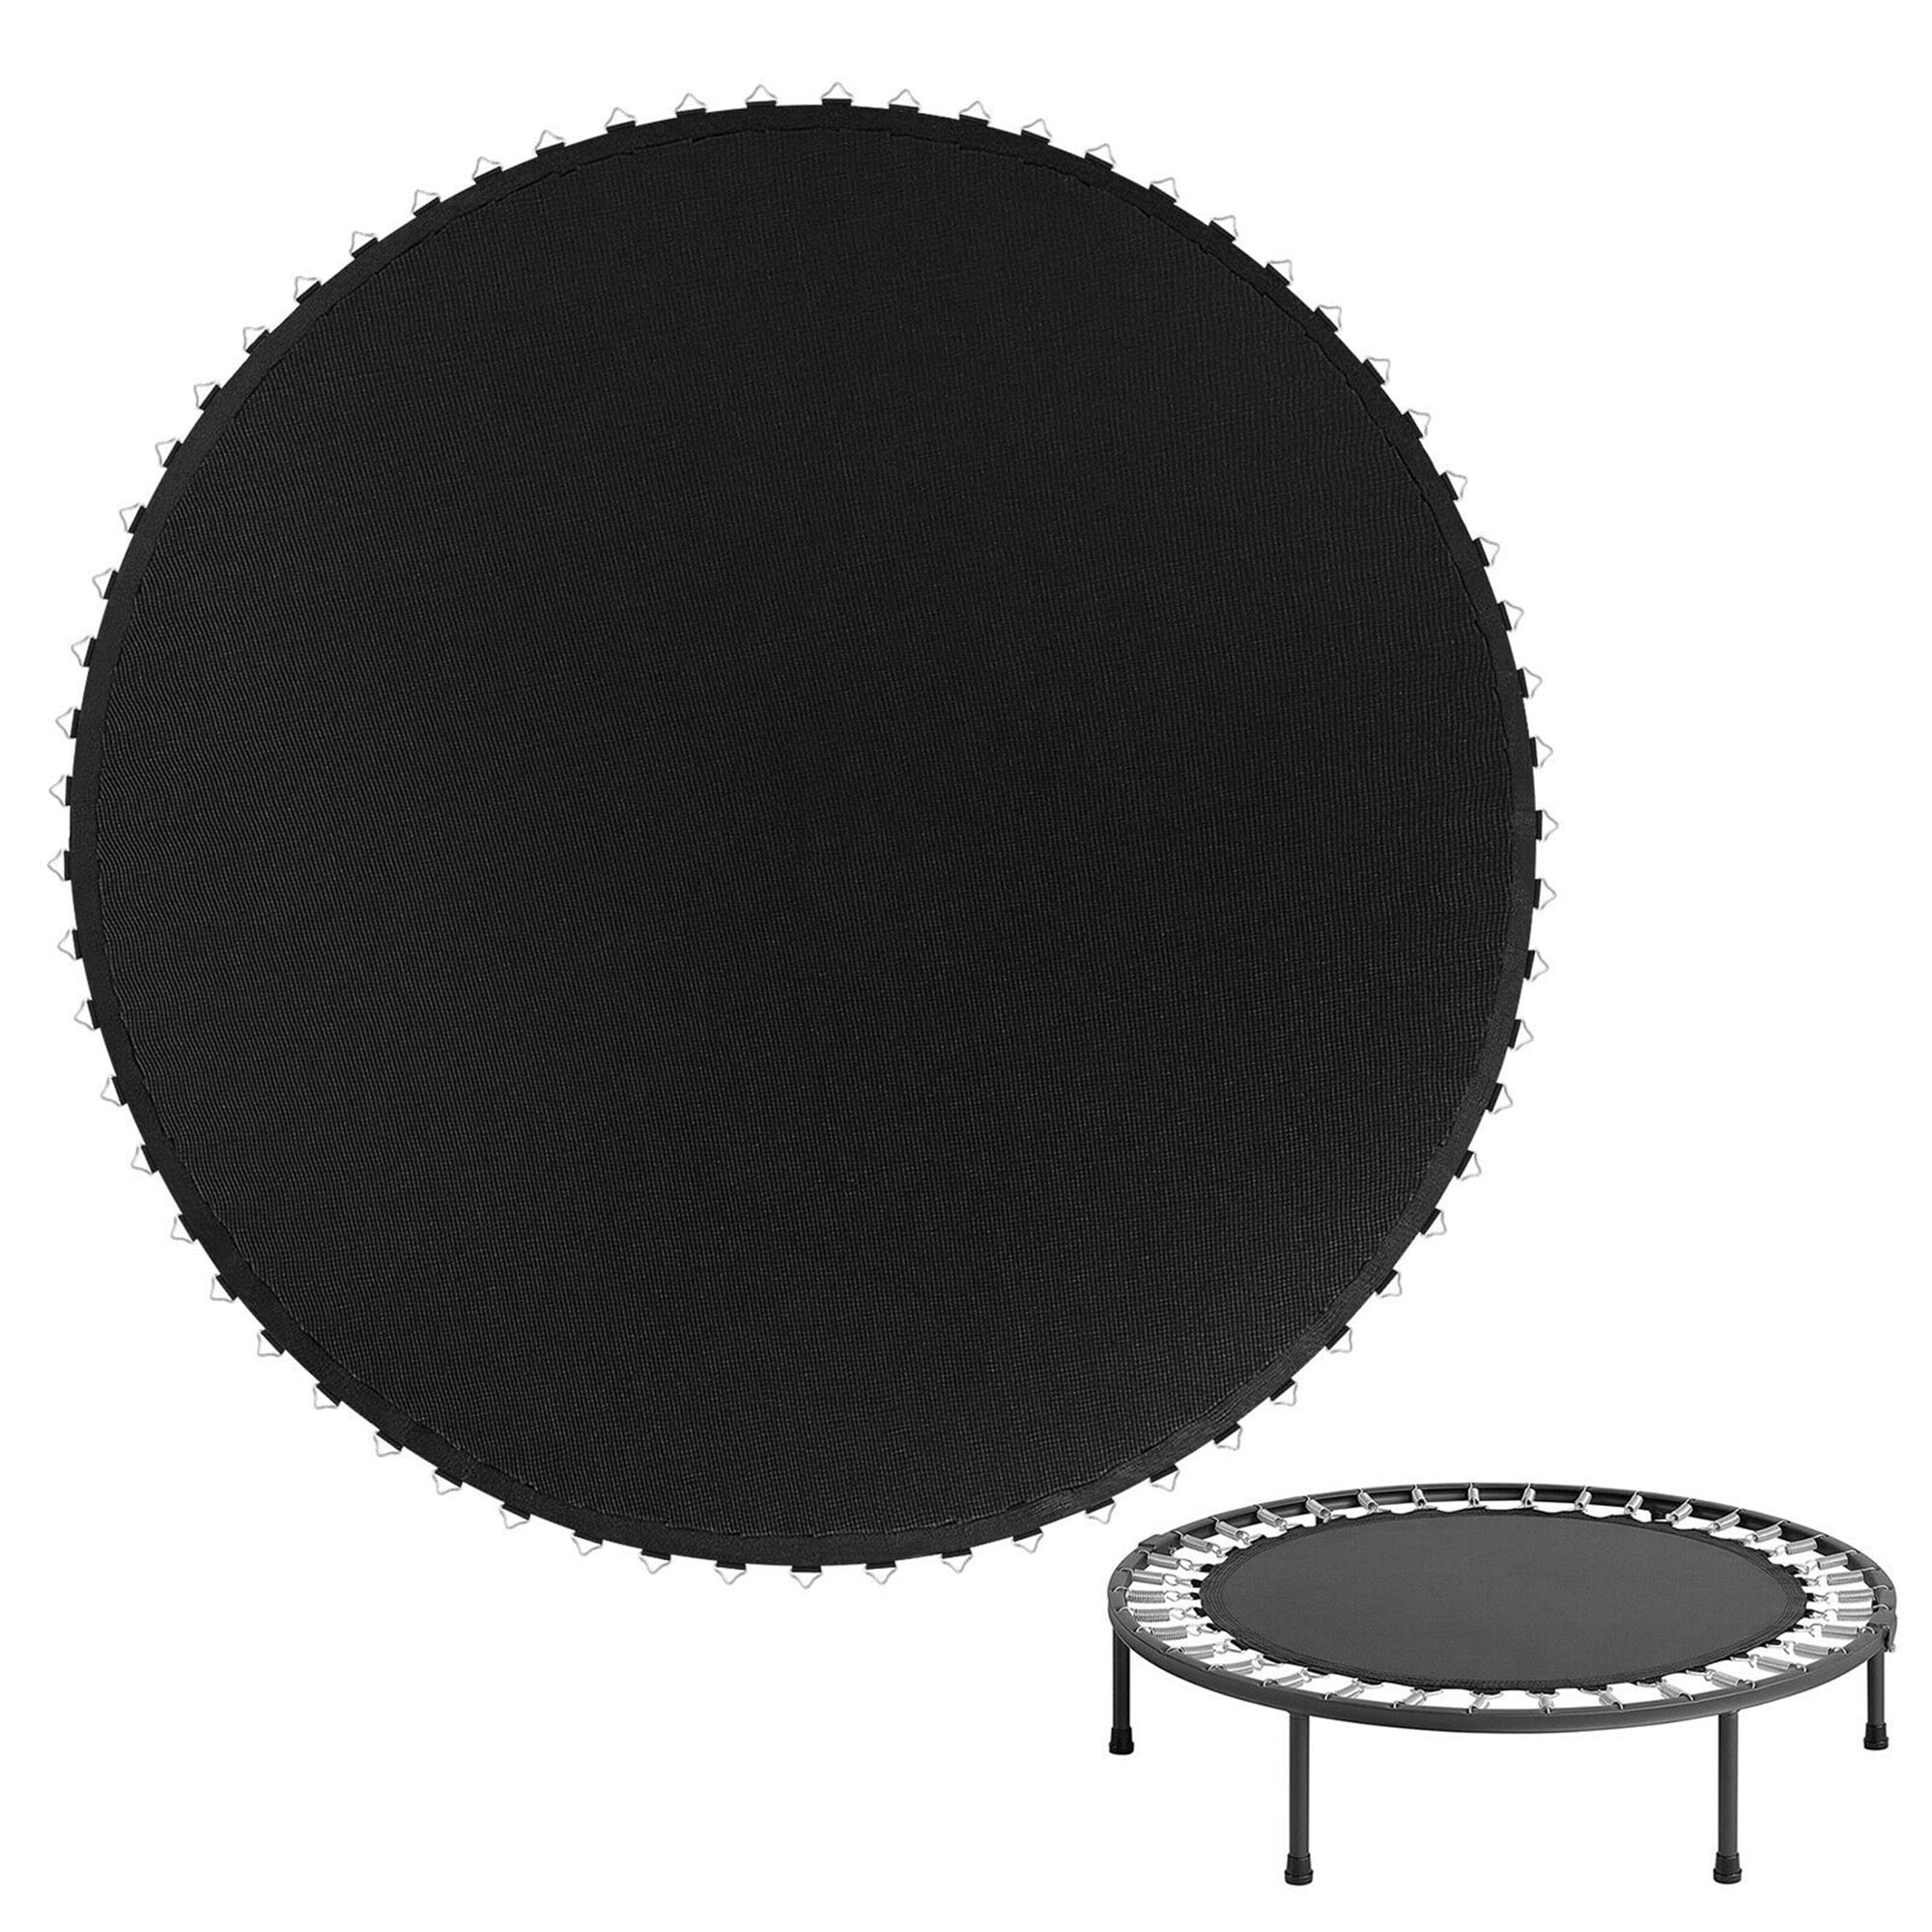 6ft 8ft 10ft 12ft Trampoline Mat Replacement Round Frame Jumping Bed Durable 